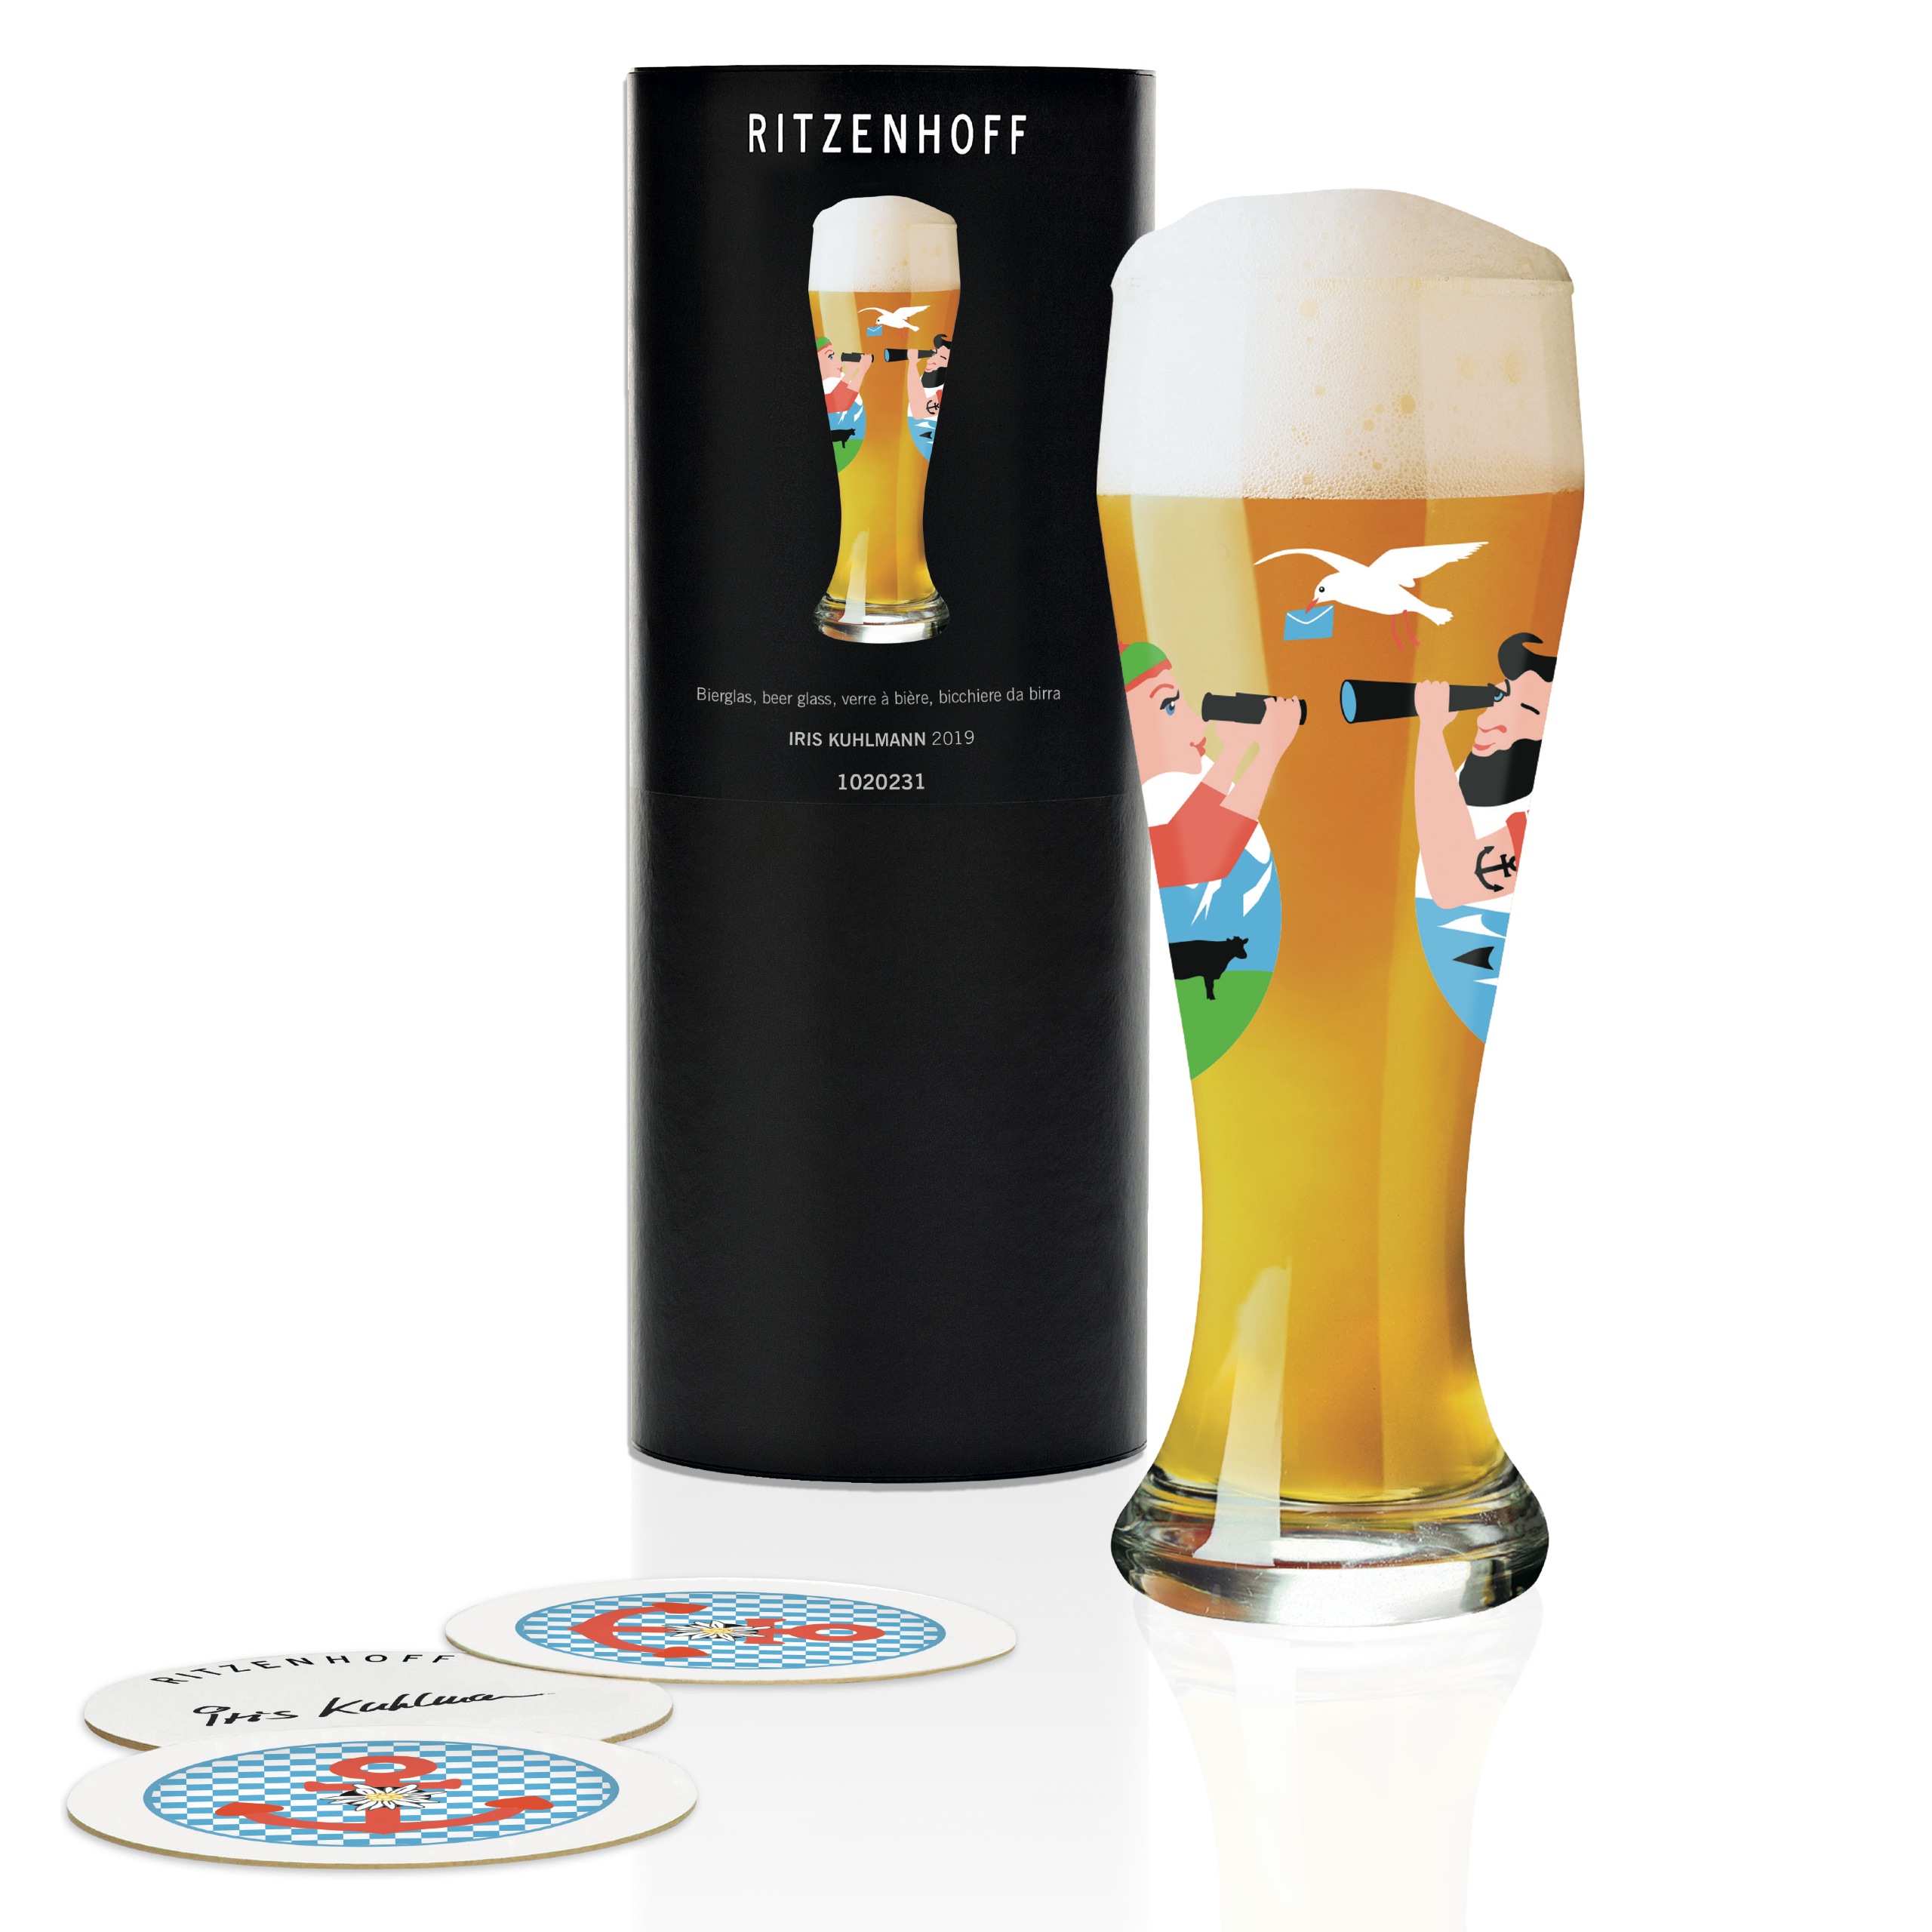 Ritzenhoff Wheat Beer beer glass Direct Kuhlmann Craft by 2019 Box – I